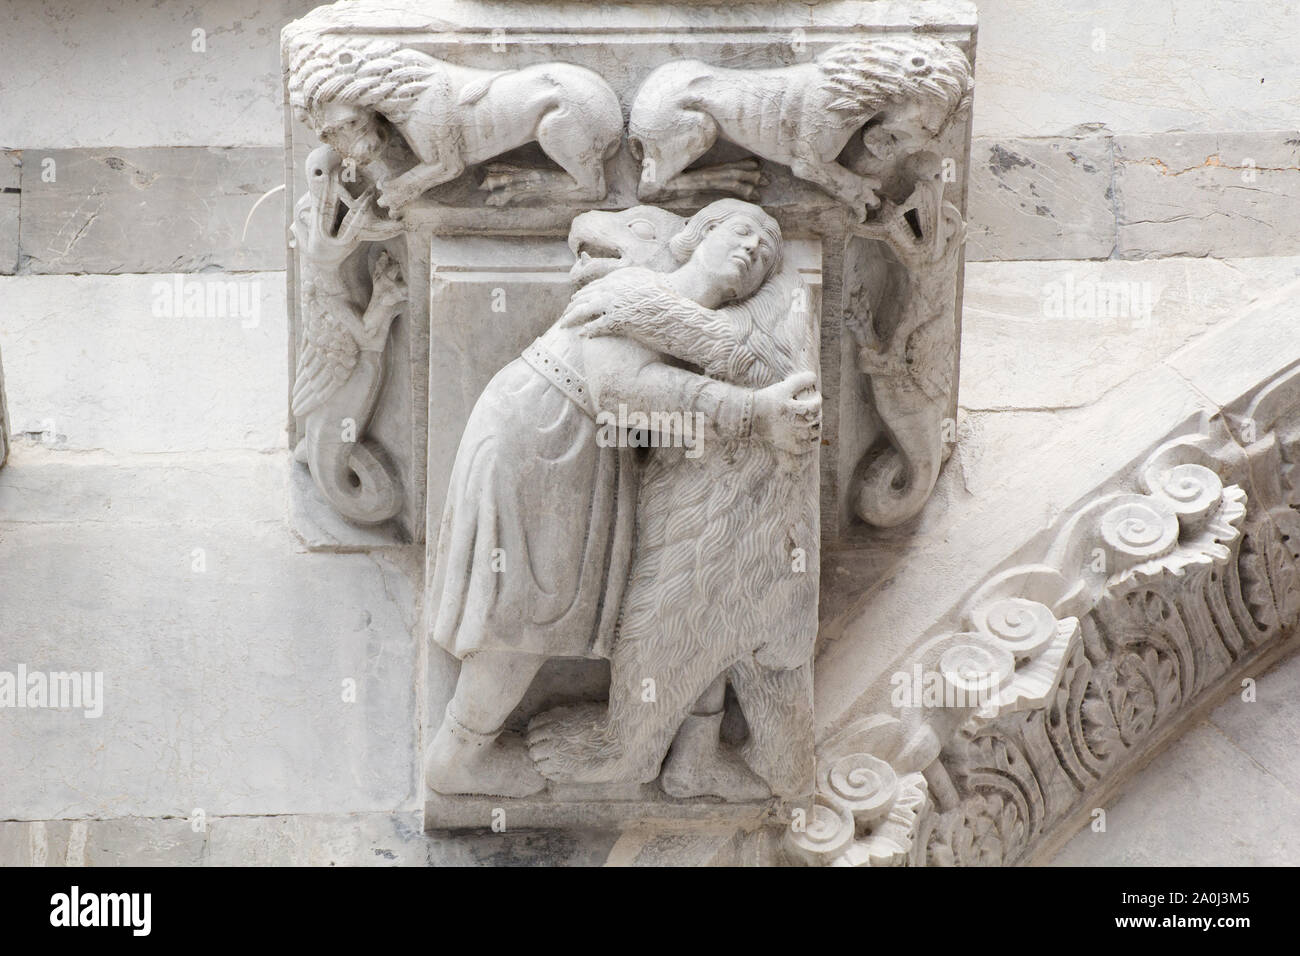 Medieval Imagery: A Bear embracing a Man (XIII C) - Romanesque façade of the Cathedral of Saint Martin in Lucca (Tuscany, Italy) Stock Photo